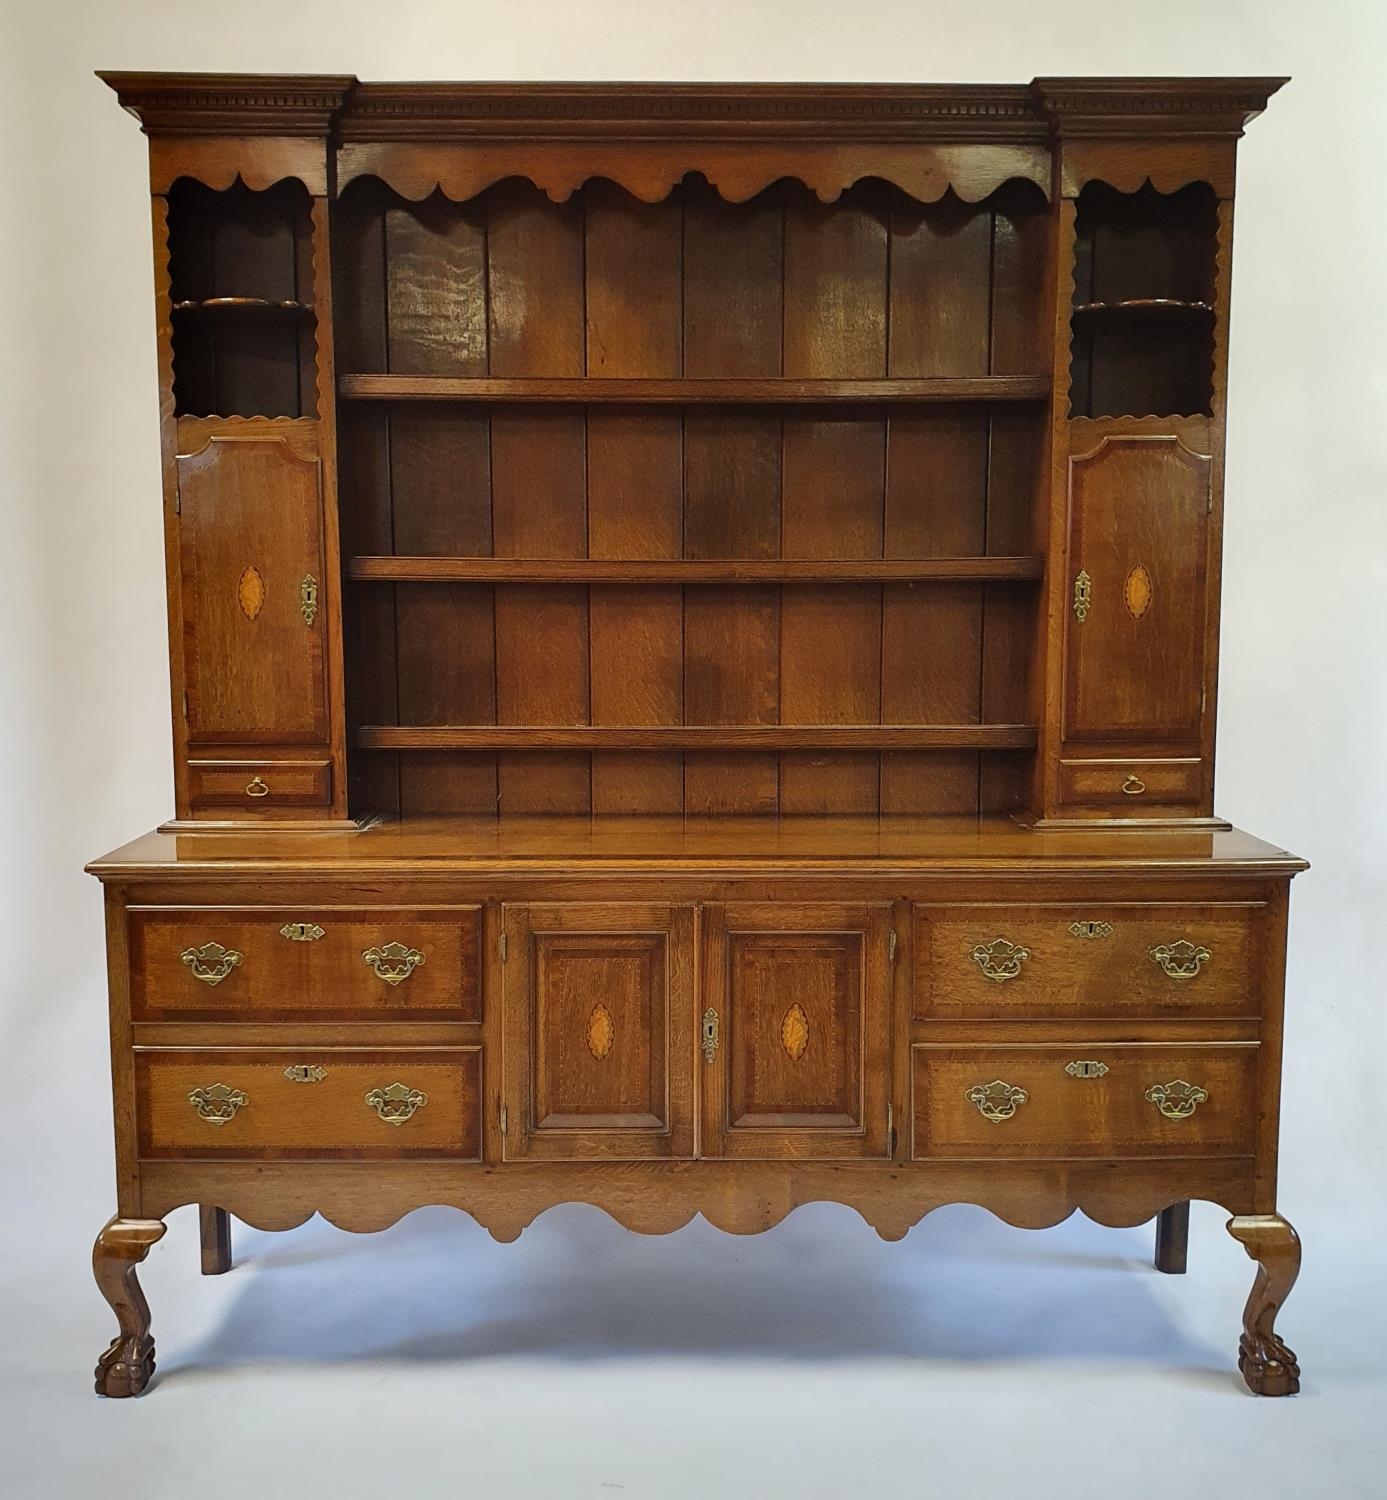 An 18th century style oak dresser, the top with shelves, two cupboard doors and two drawers, the